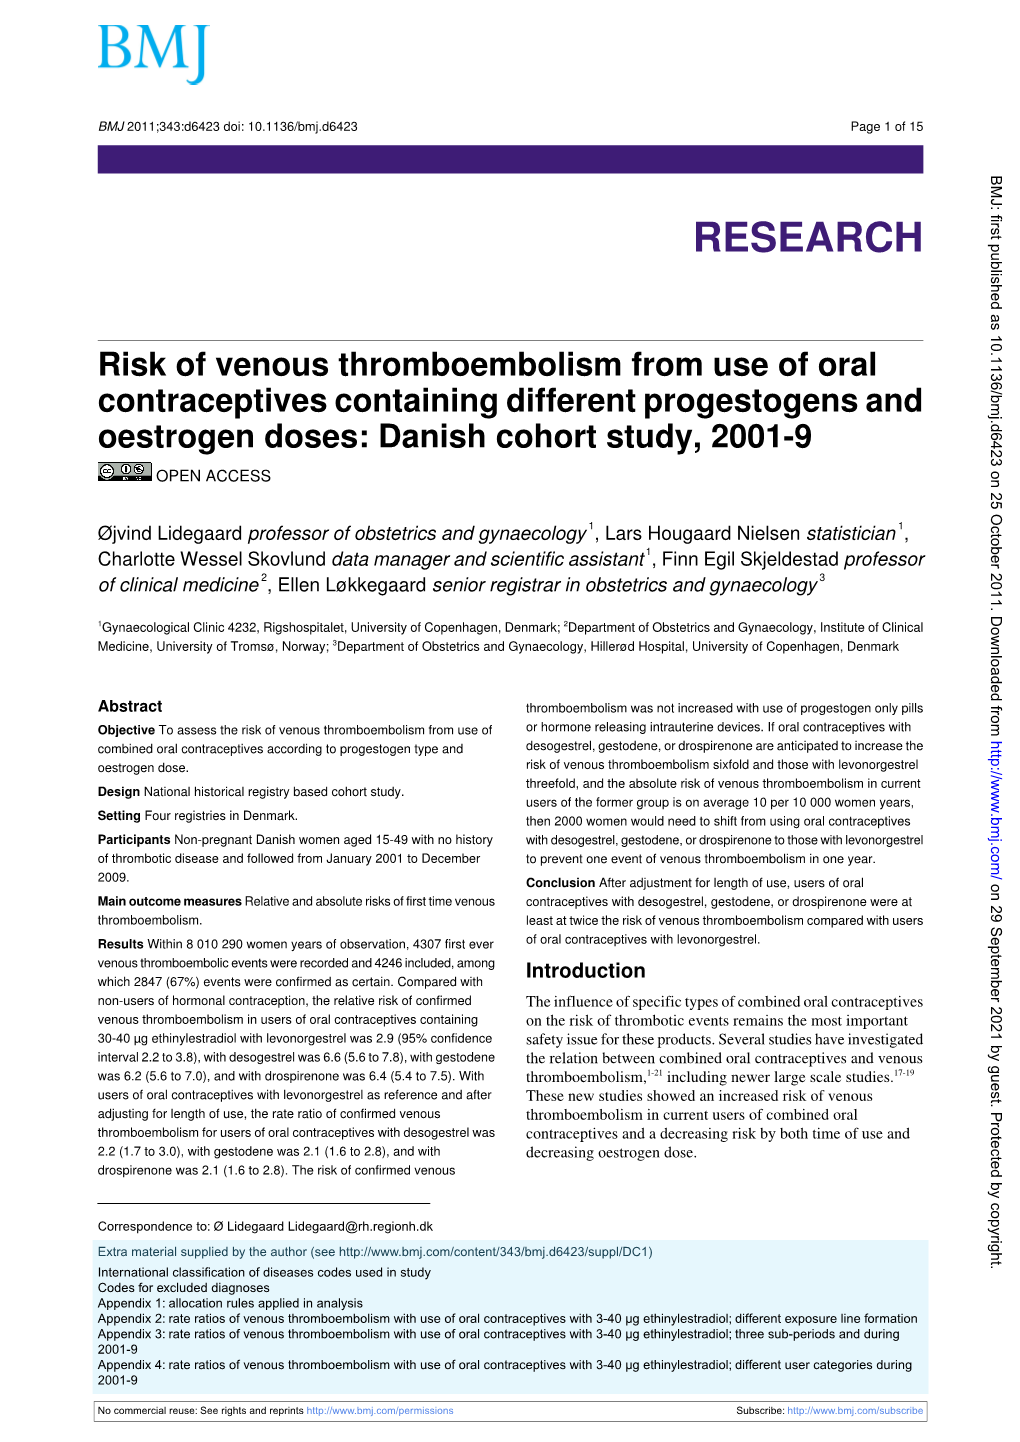 Risk of Venous Thromboembolism from Use of Oral Contraceptives Containing Different Progestogens and Oestrogen Doses: Danish Cohort Study, 2001-9 OPEN ACCESS